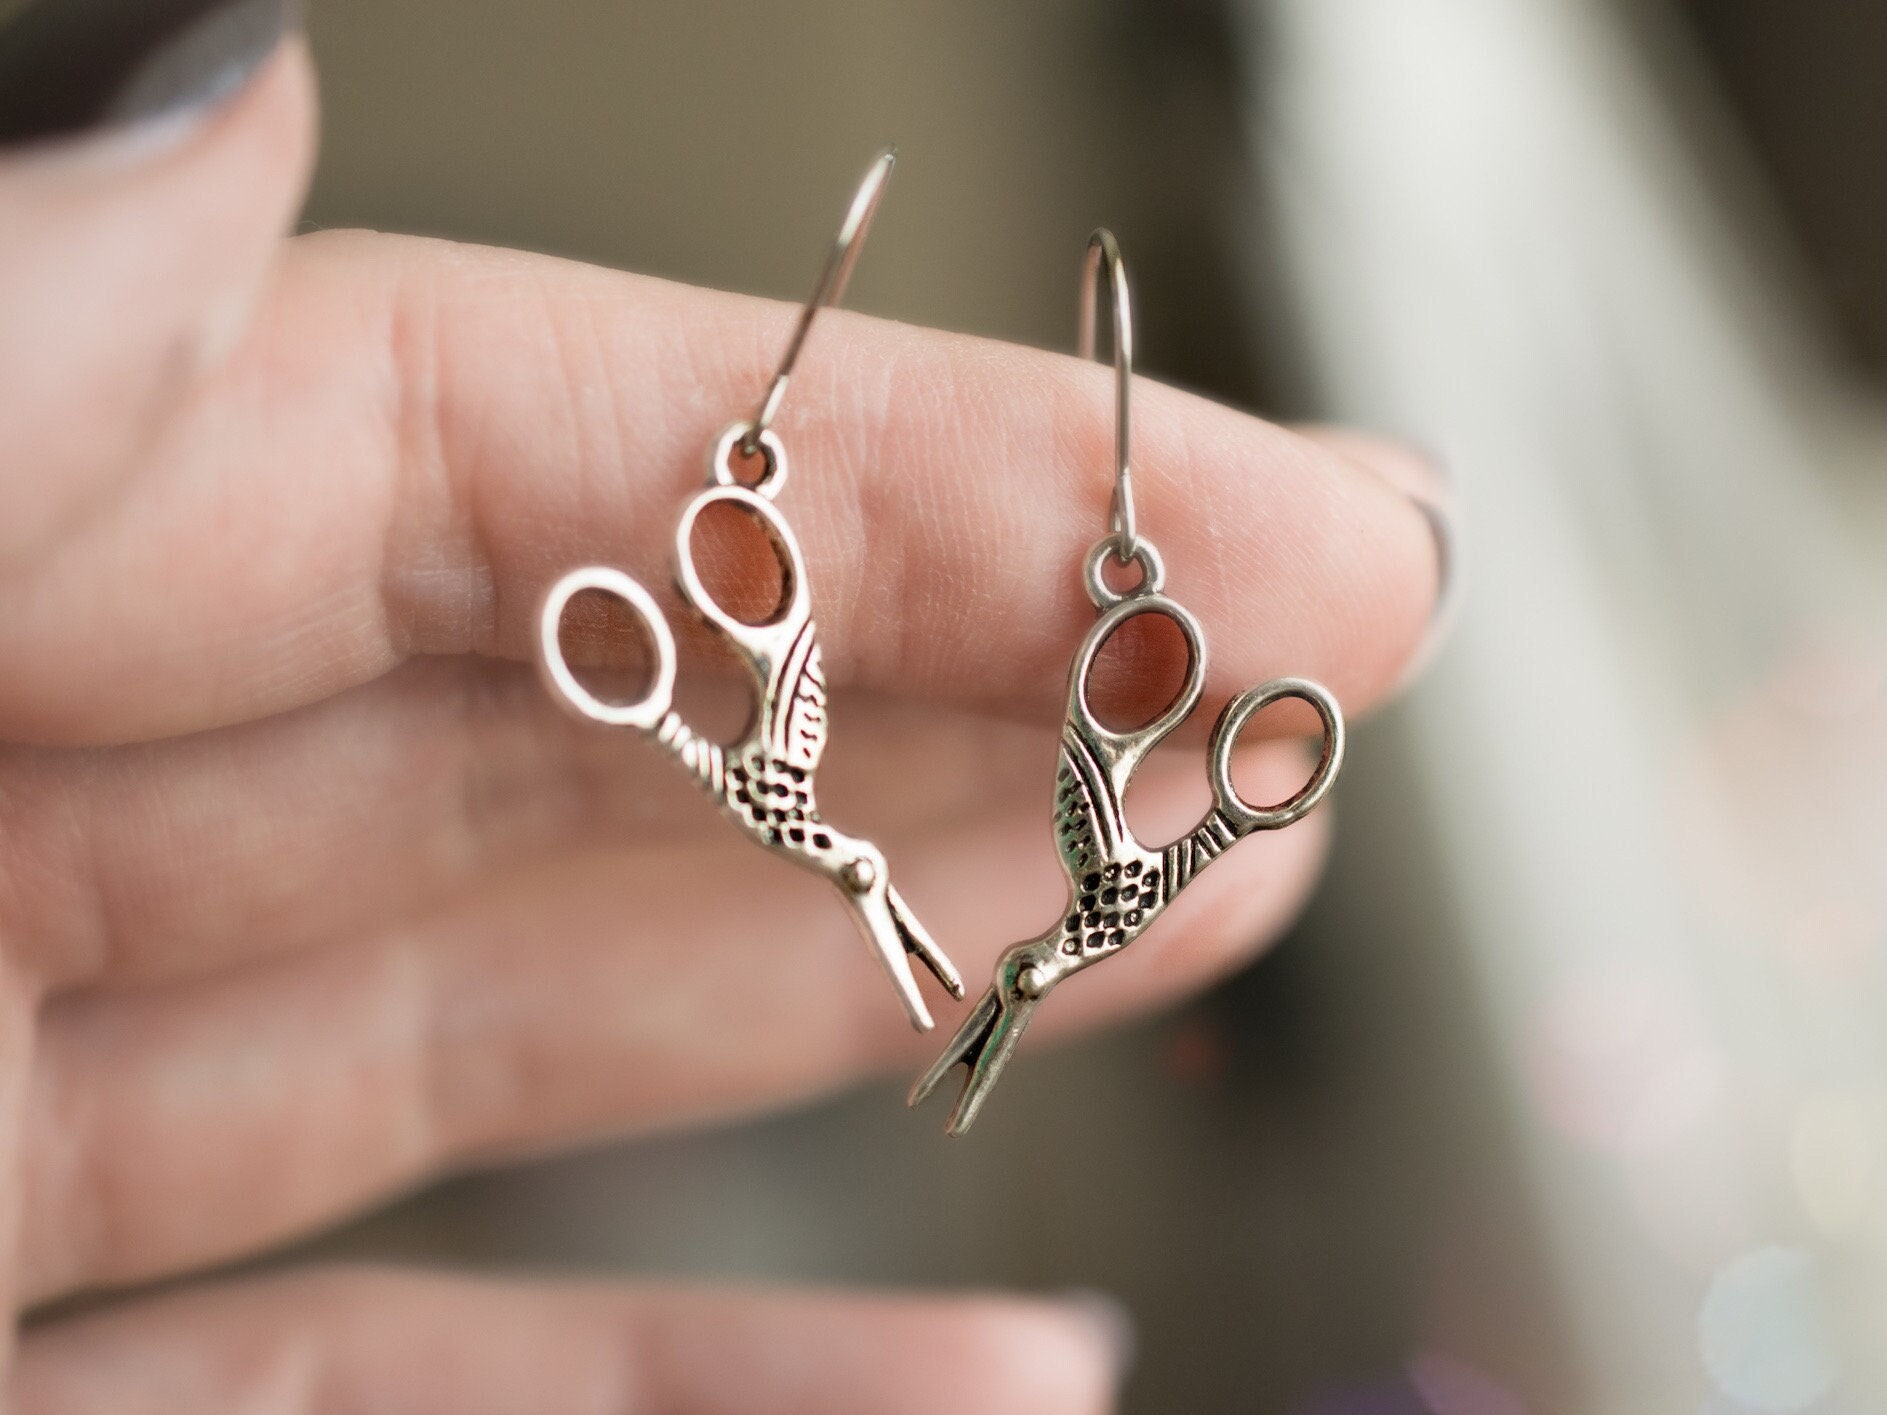  Funny Silver Cute Scissors Studs Earrings Gifts for Men Teens  Women - Hypoallergenic Tiny Silver Cute Scissors Fashion Jewelry: Clothing,  Shoes & Jewelry